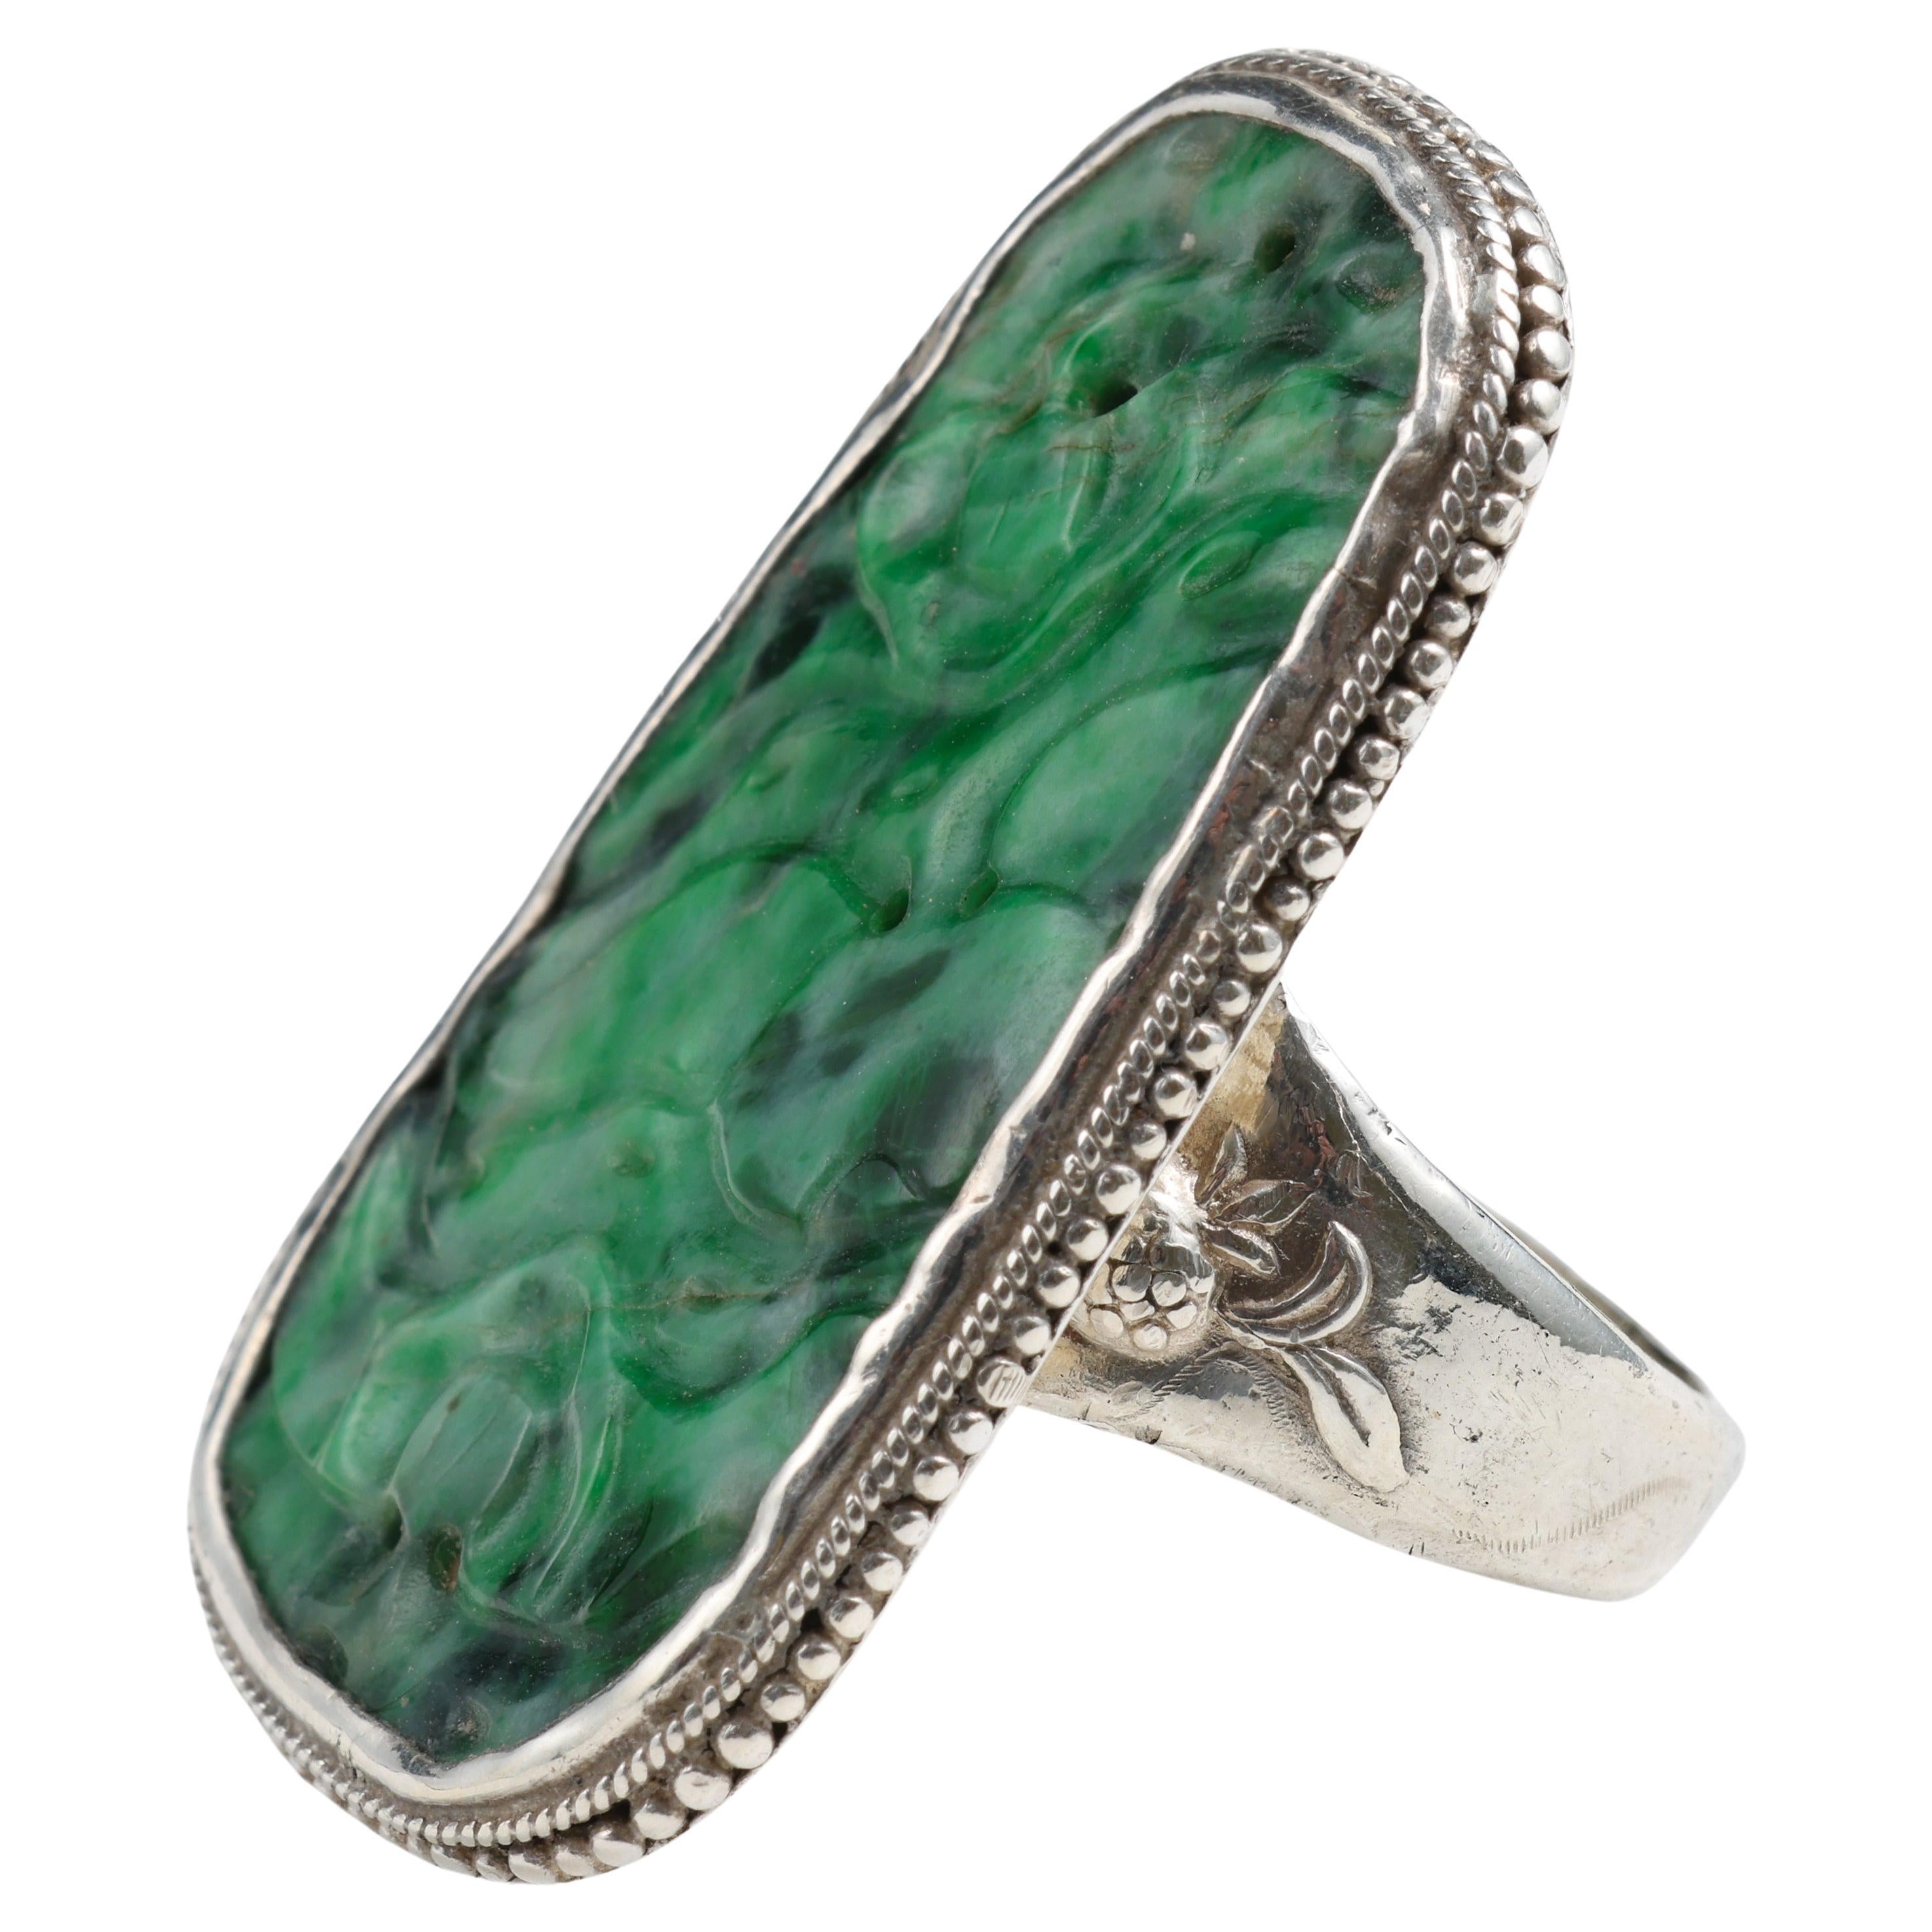 Carved Jade Ring from Arts & Crafts Period